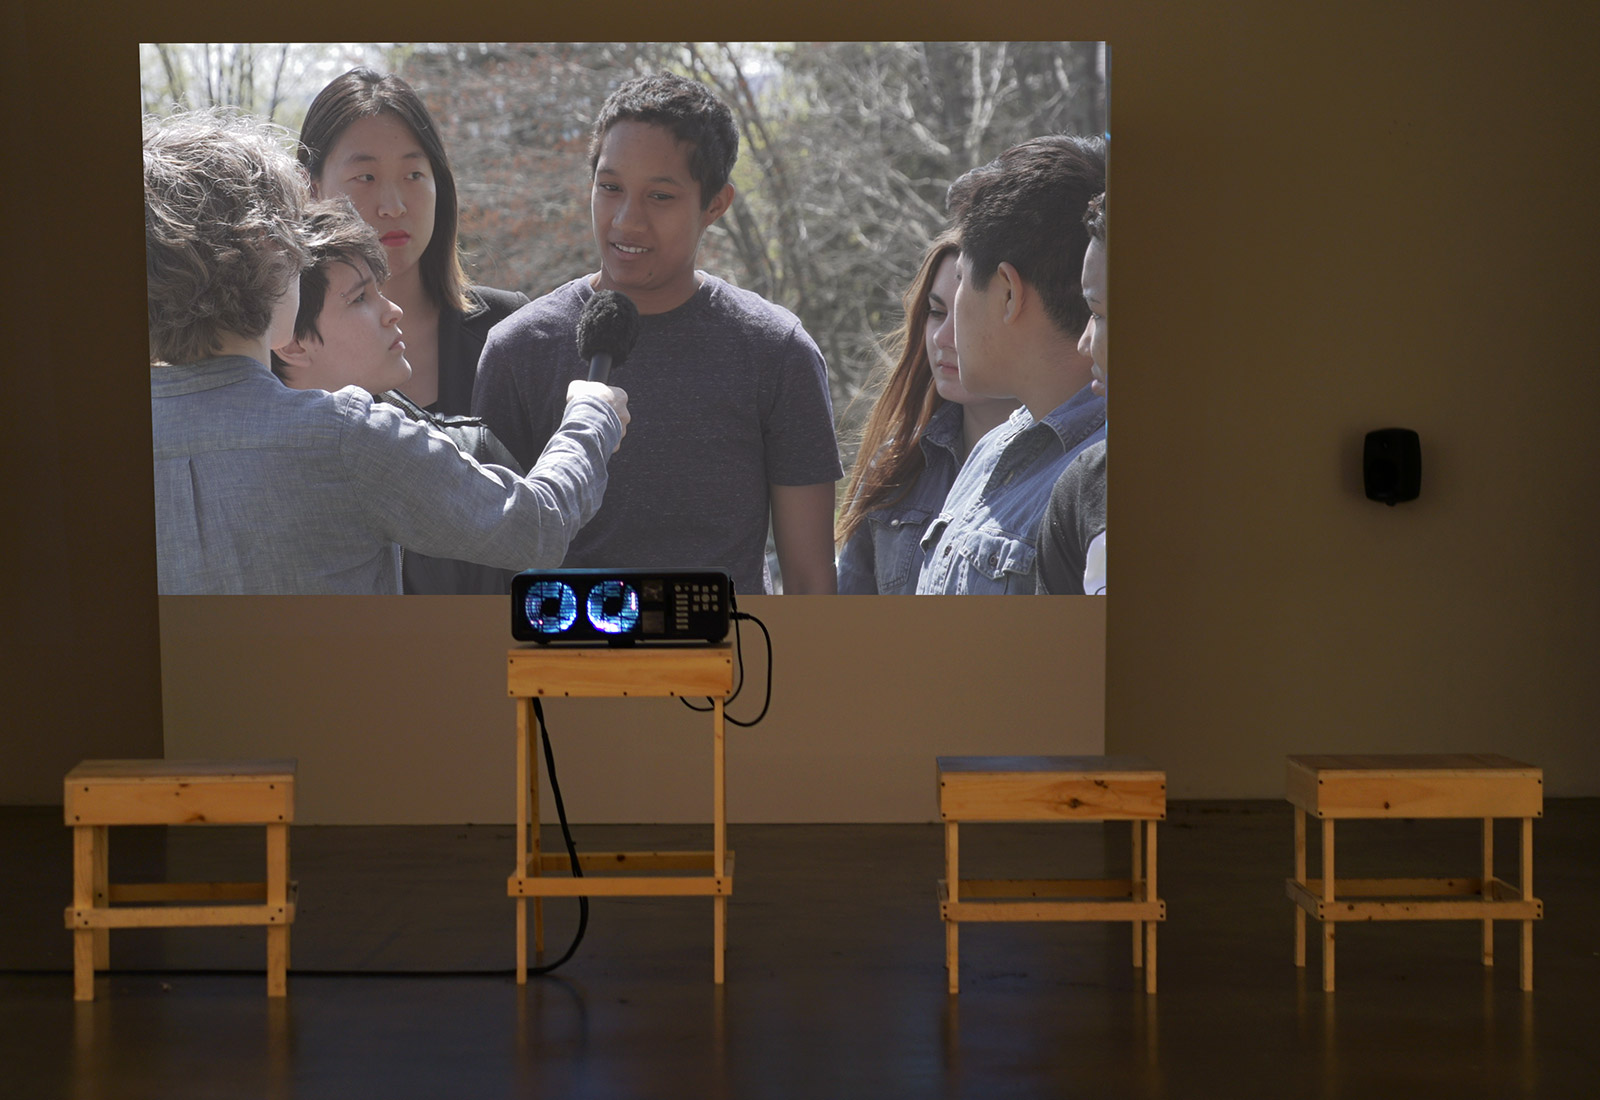 phot of a video art installation showing a group of young people being interviewed